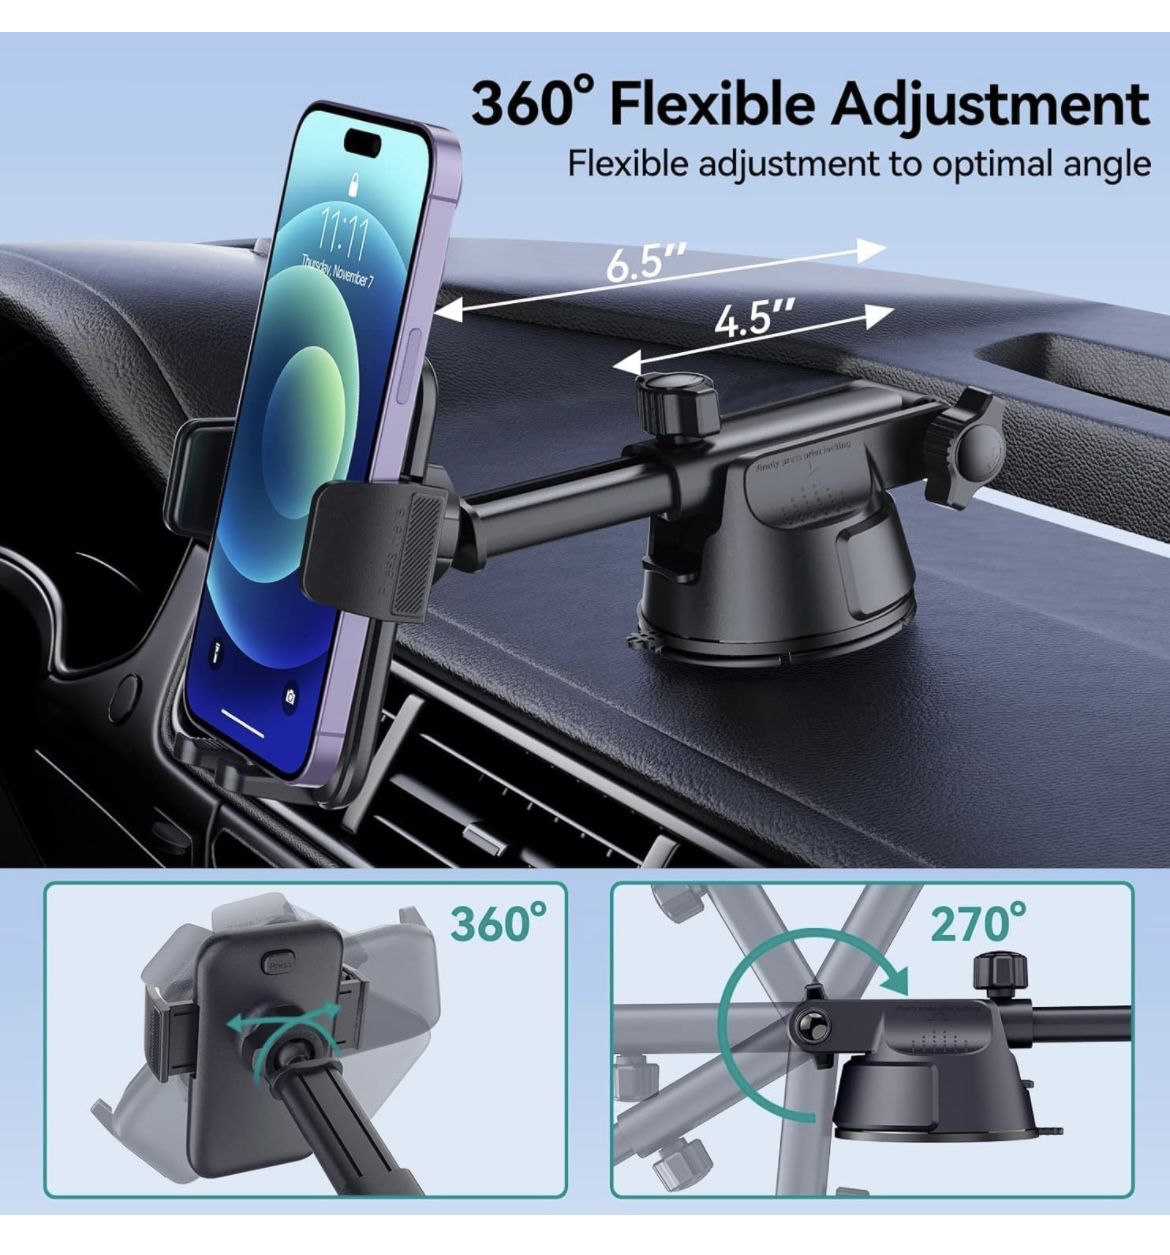 3 in 1 Universal Phone Mount for Car Dashboard Windshield Air Vent Hands Free Car Mount for iPhone Android Smartphone